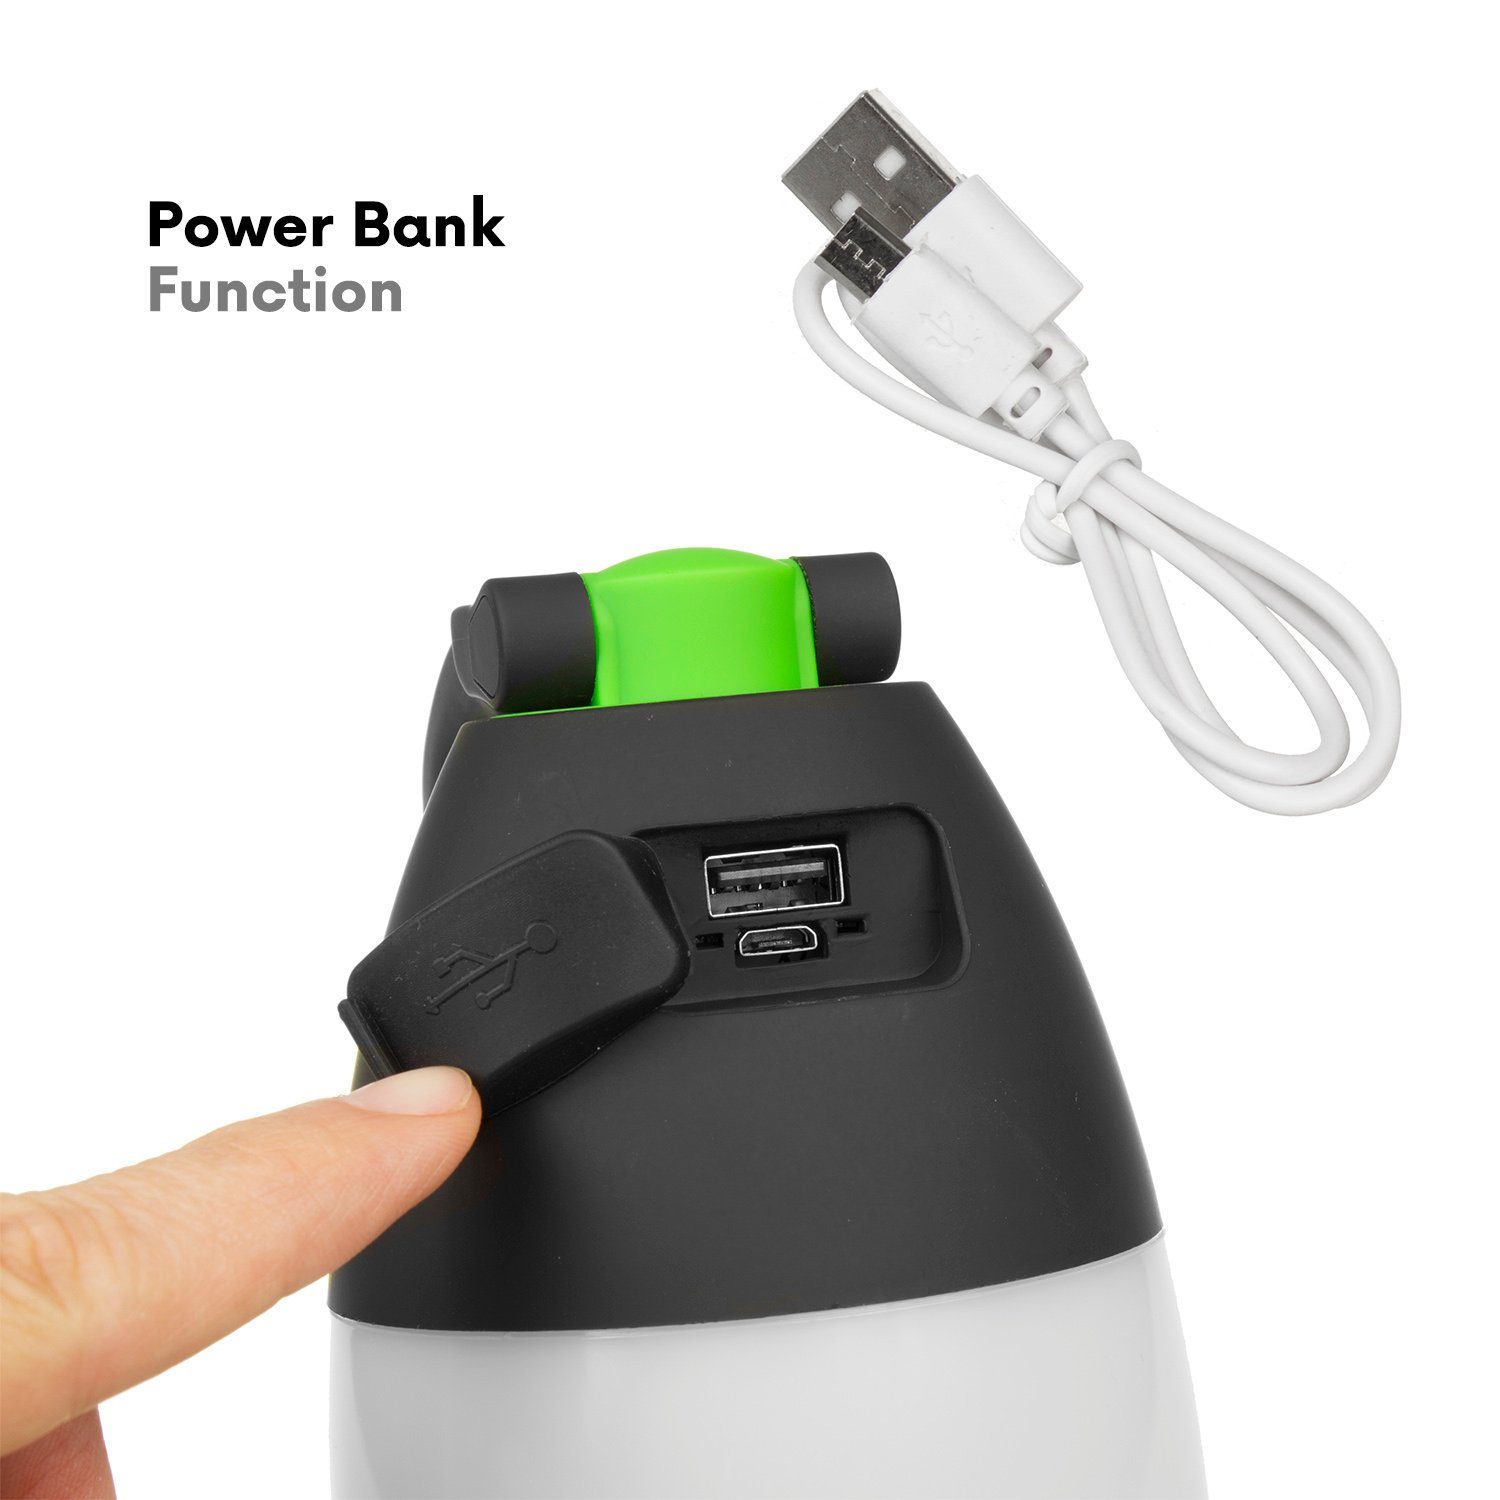 Maclean LED Taschenlampe Taschenlampe, Powerbank-Funktion Camping MCE298, 3in1 - Multifunktion